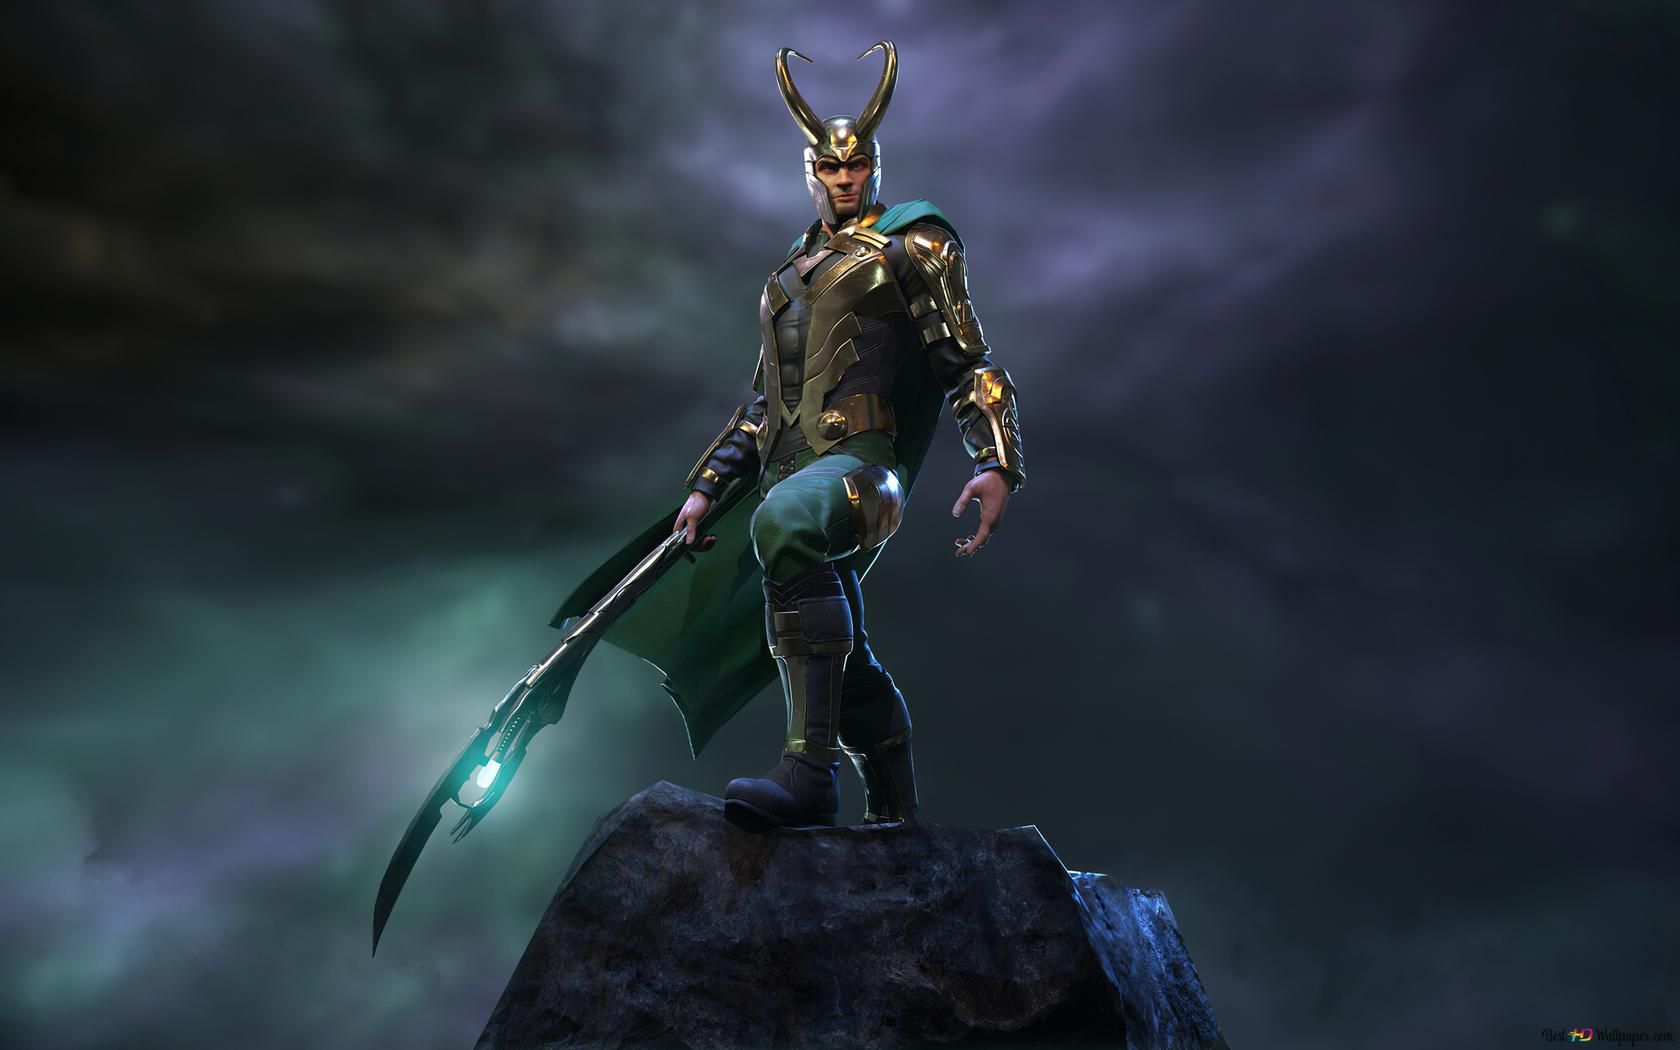 Loki Standing On Rock With His Space Stone Sword 4K wallpaper download